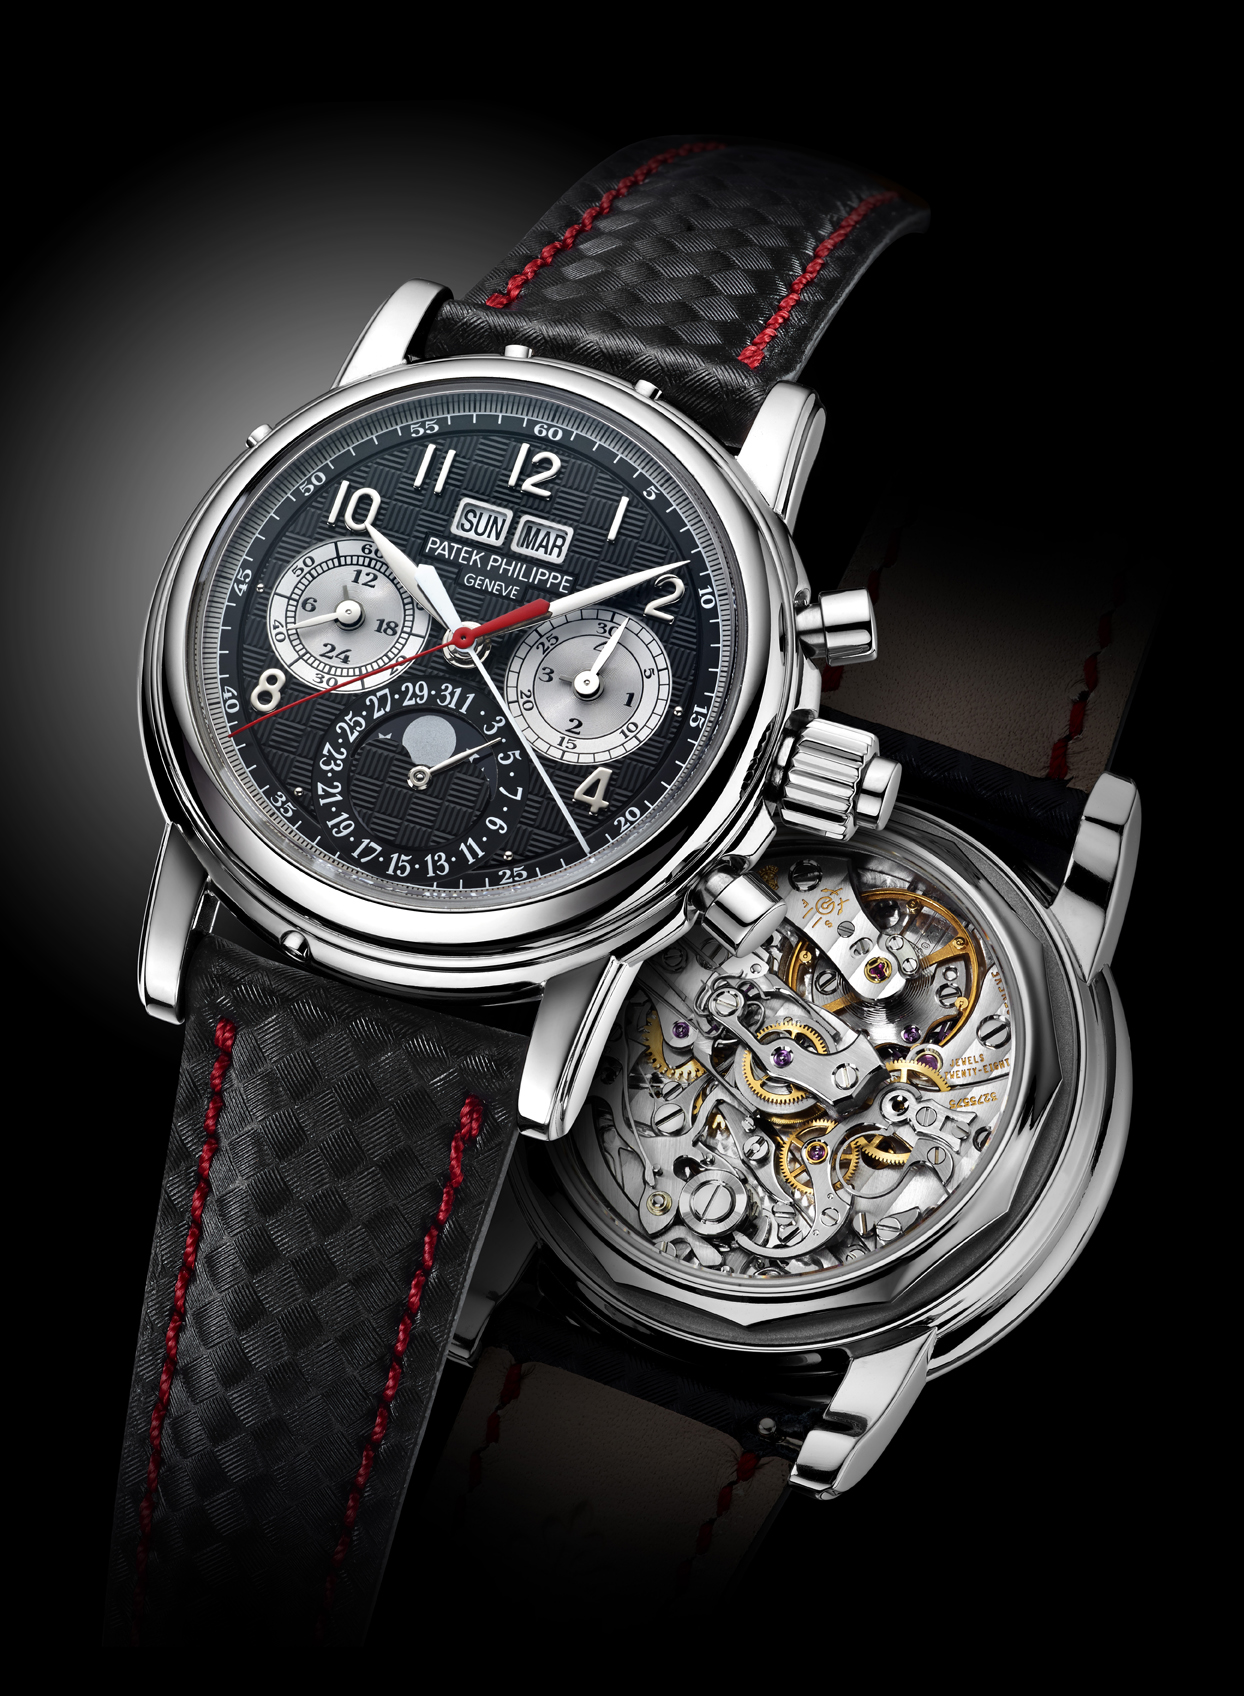 One-of-a-kind Patek Philippe 5004 Titanium to be Auctioned for Only Watch 2013